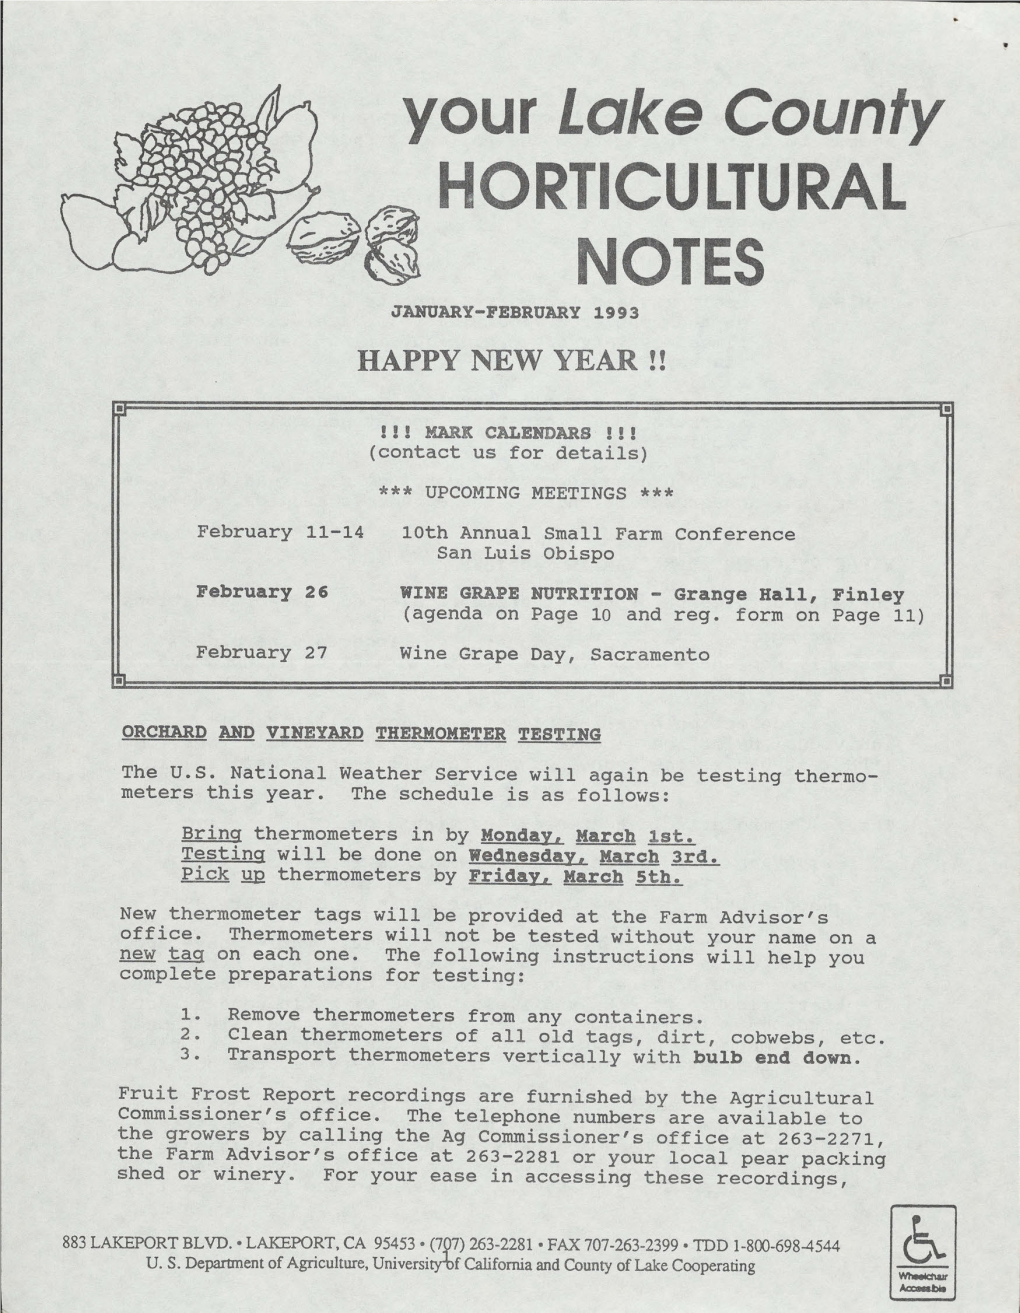 Your Lake County HORTICULTURAL I NOTES JANUARY-FEBRUARY 1993